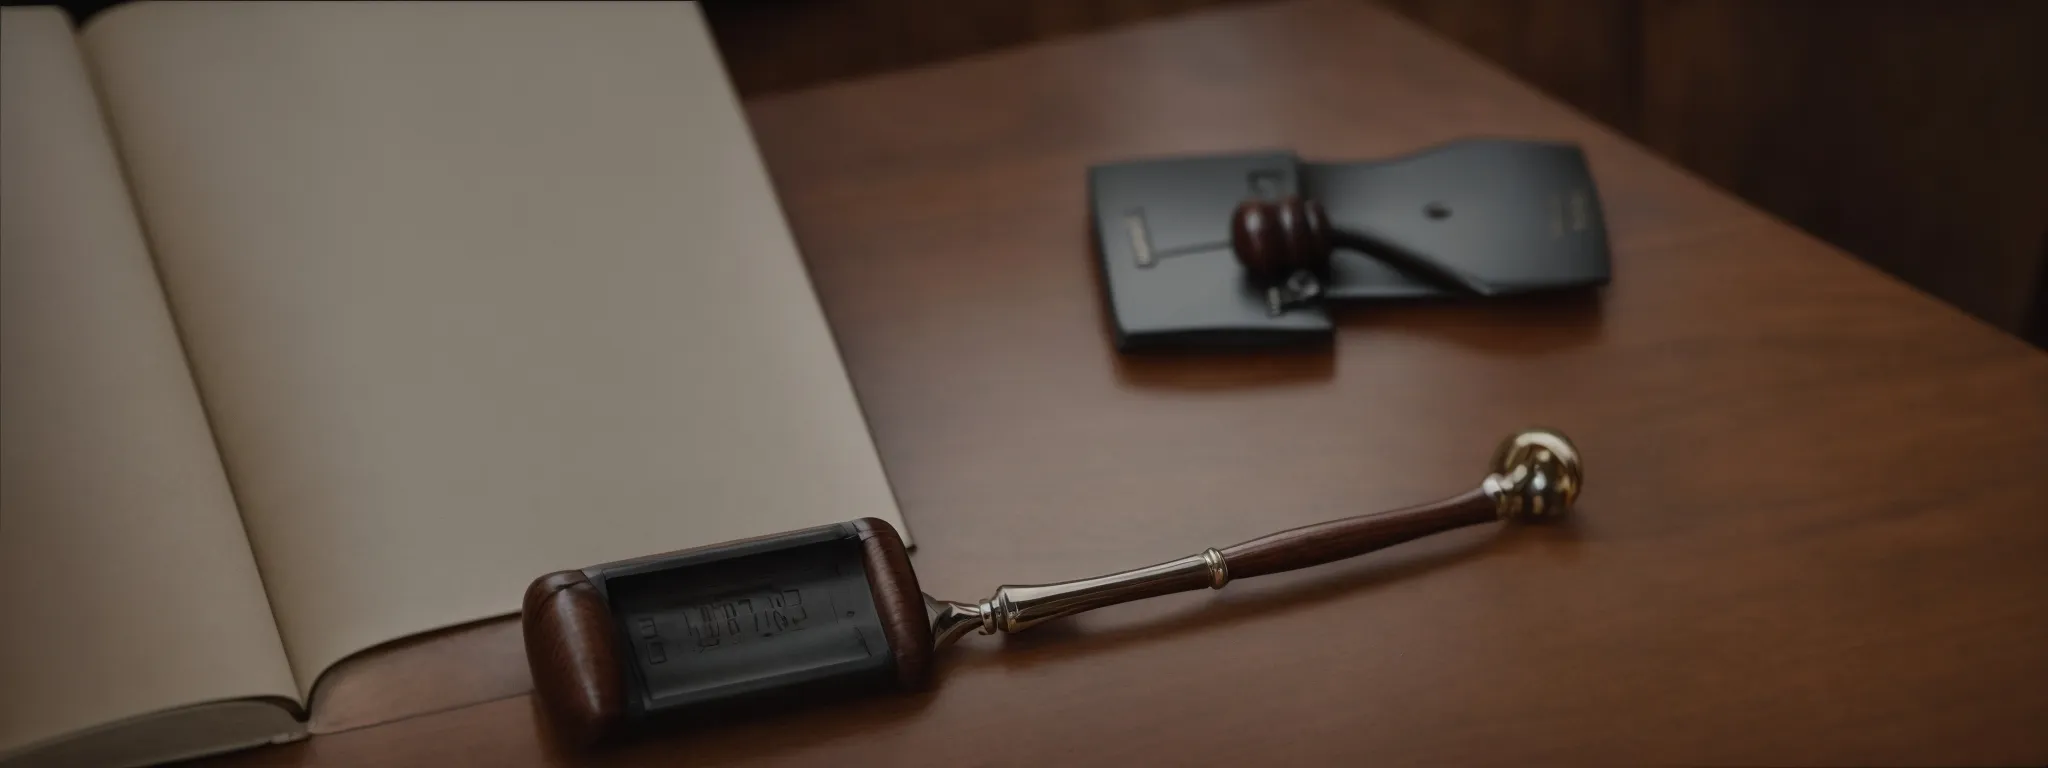 a scale of justice symbolizing legal balance rests on a book of laws, with a gavel nearby on a polished wooden desk.